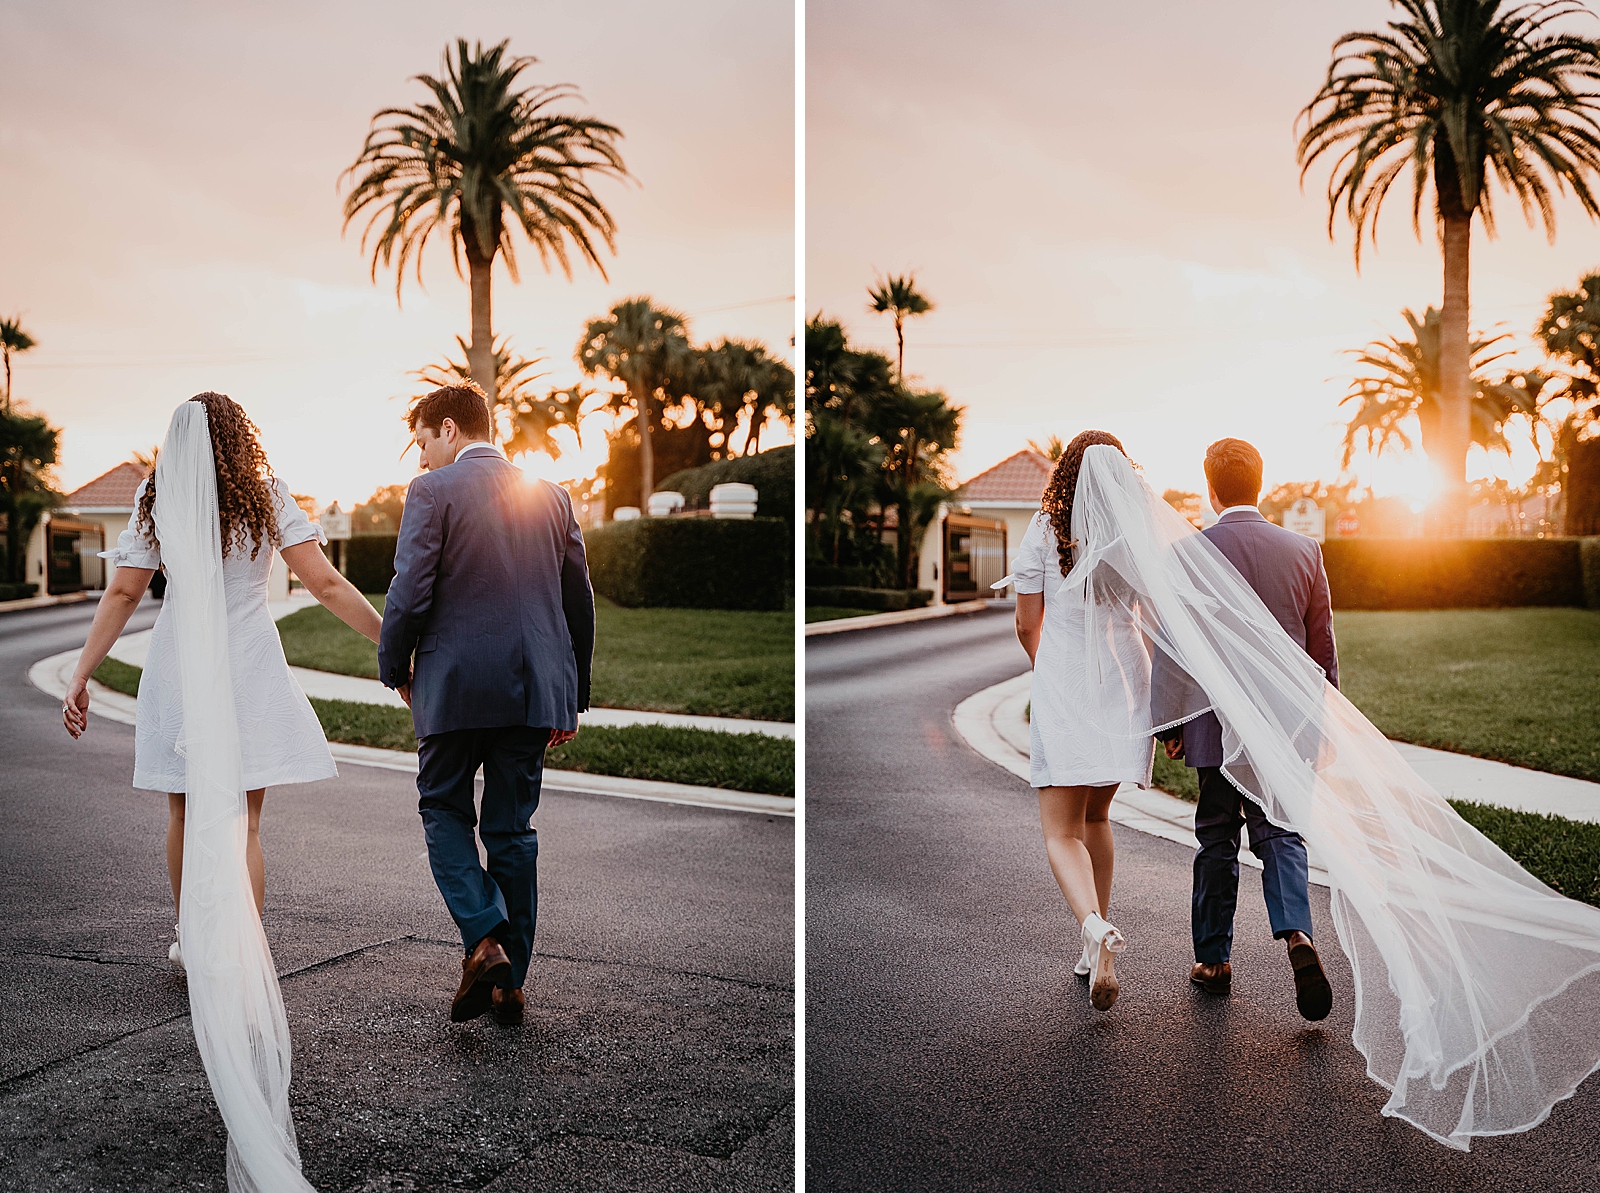 Bride and Groom holding hands and walking on the street together as the sun sets Intimate South Florida Wedding Photography captured by South Florida Wedding Photographer Krystal Capone Photography 